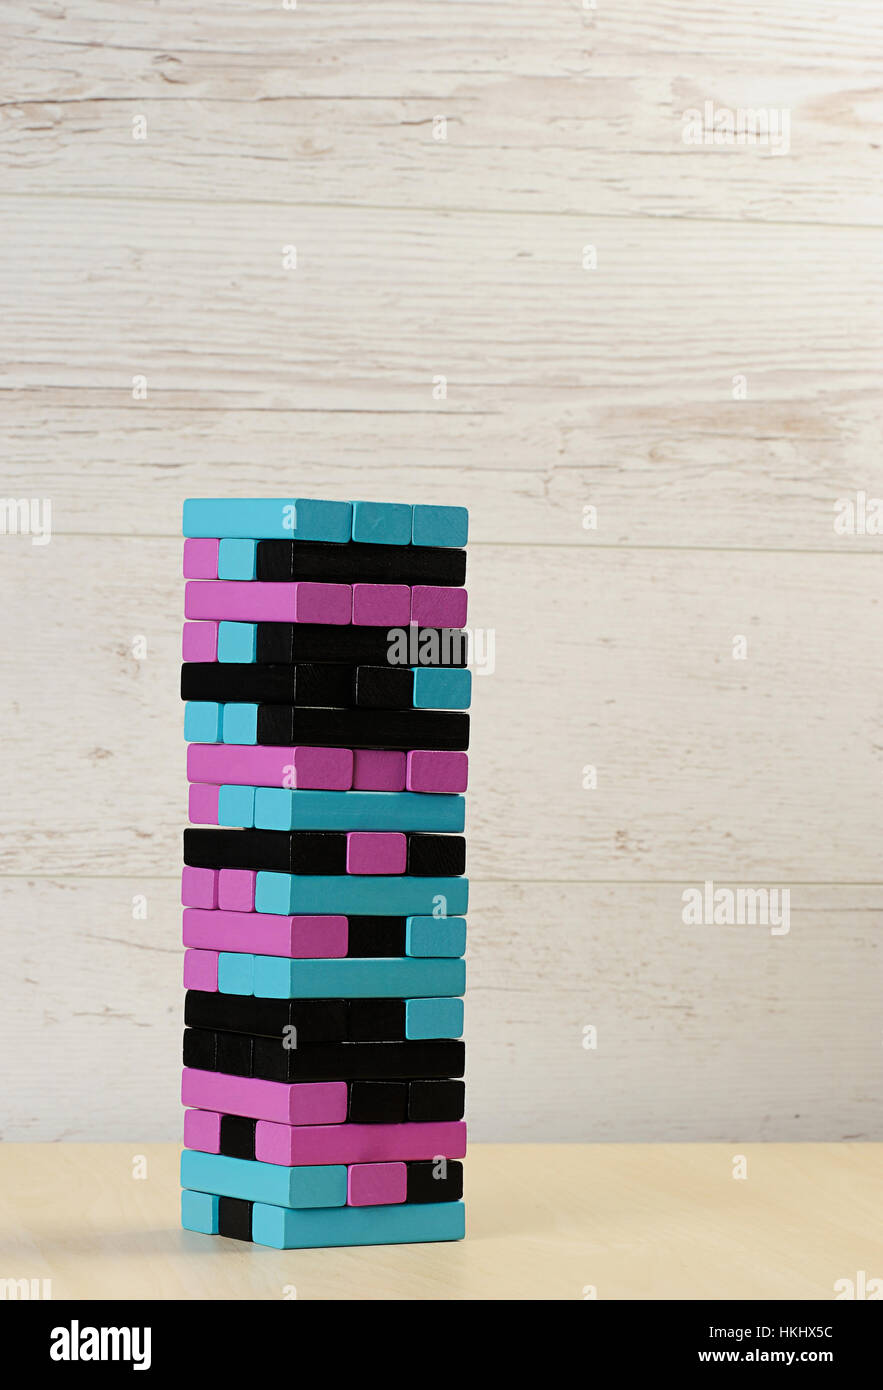 jenga tower colour stay on wood table Stock Photo